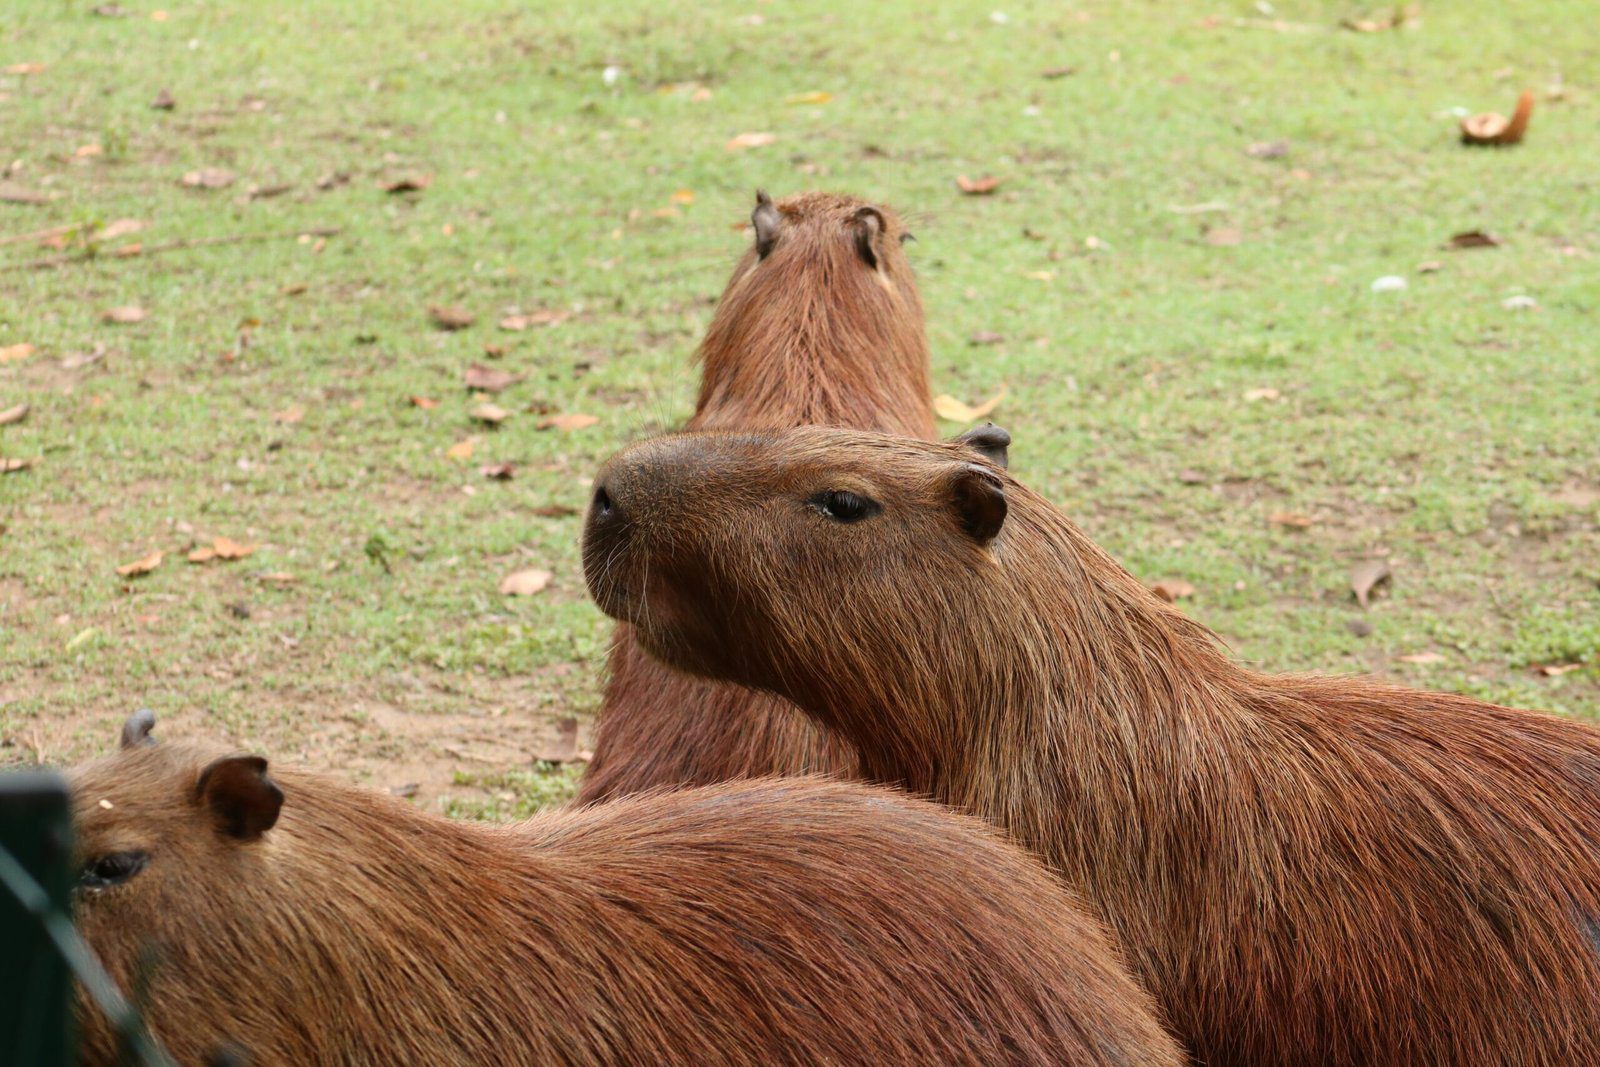 Can I legally own a capybara in my area?